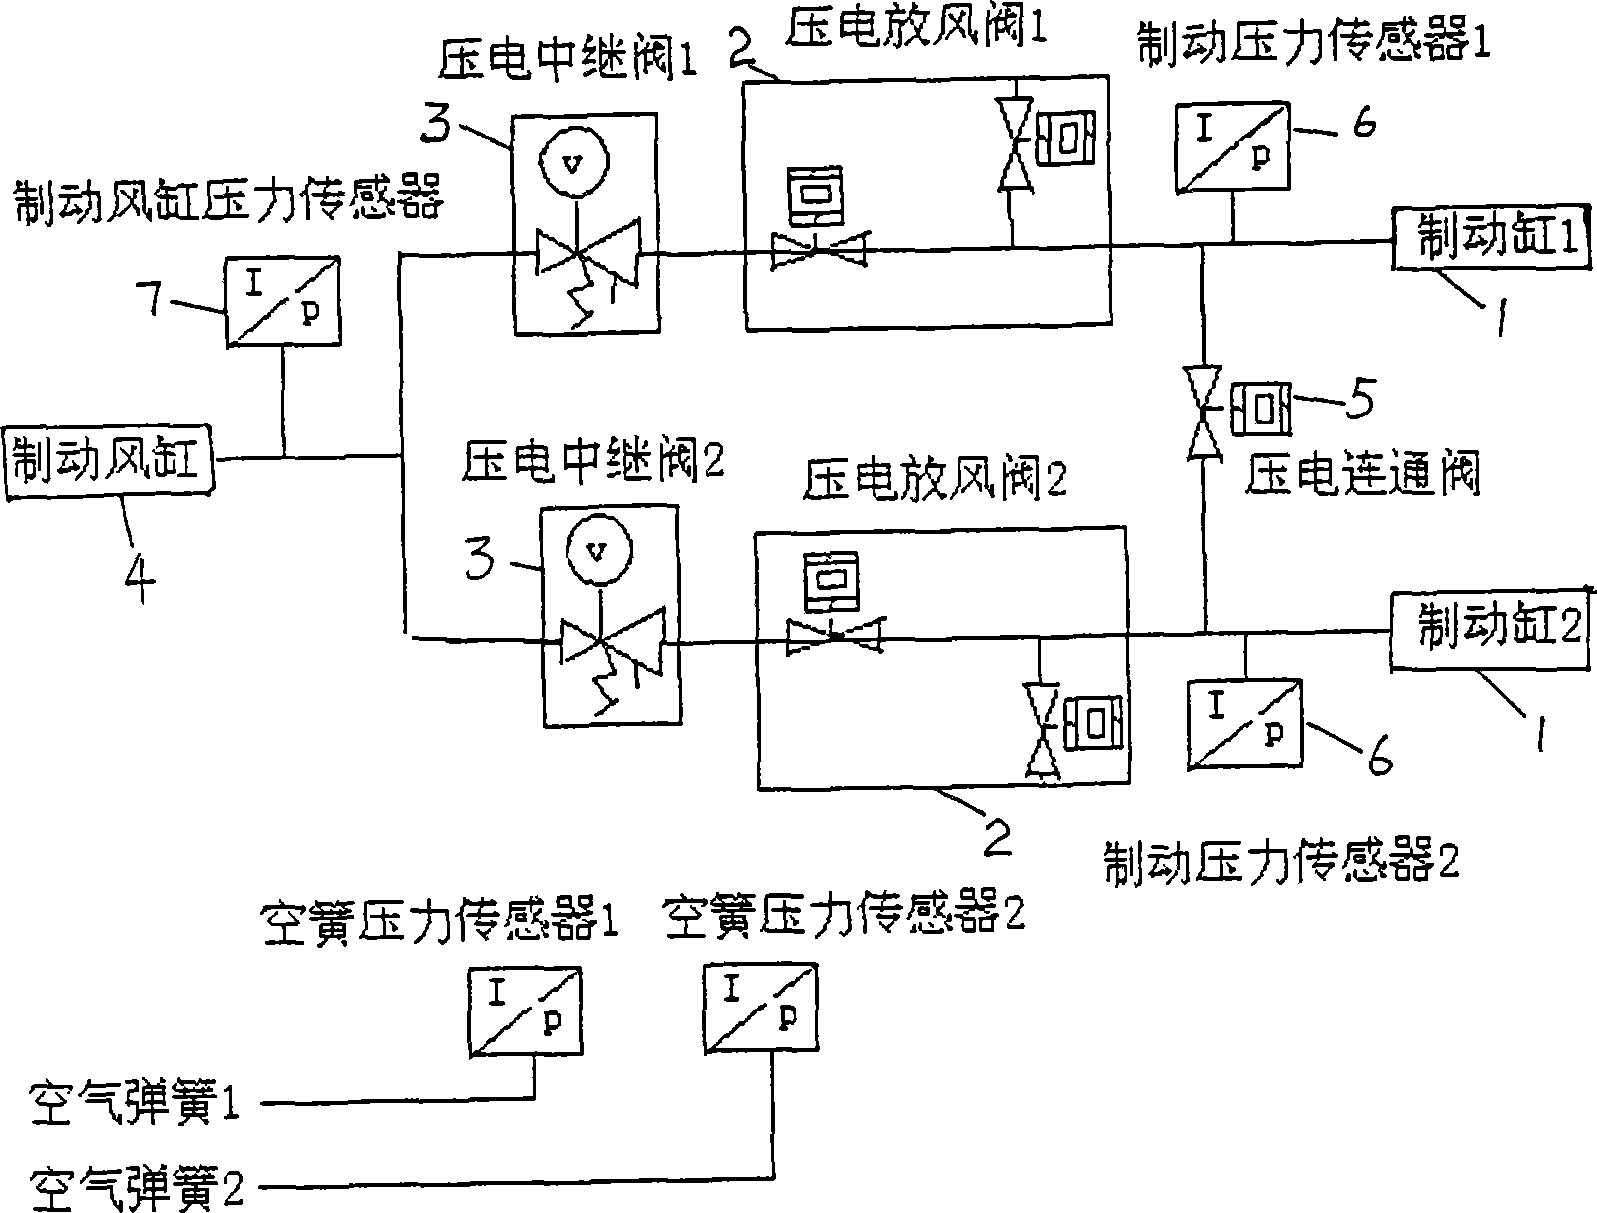 Electropneumatic brake method and system with fault complementation control based on single-axle control